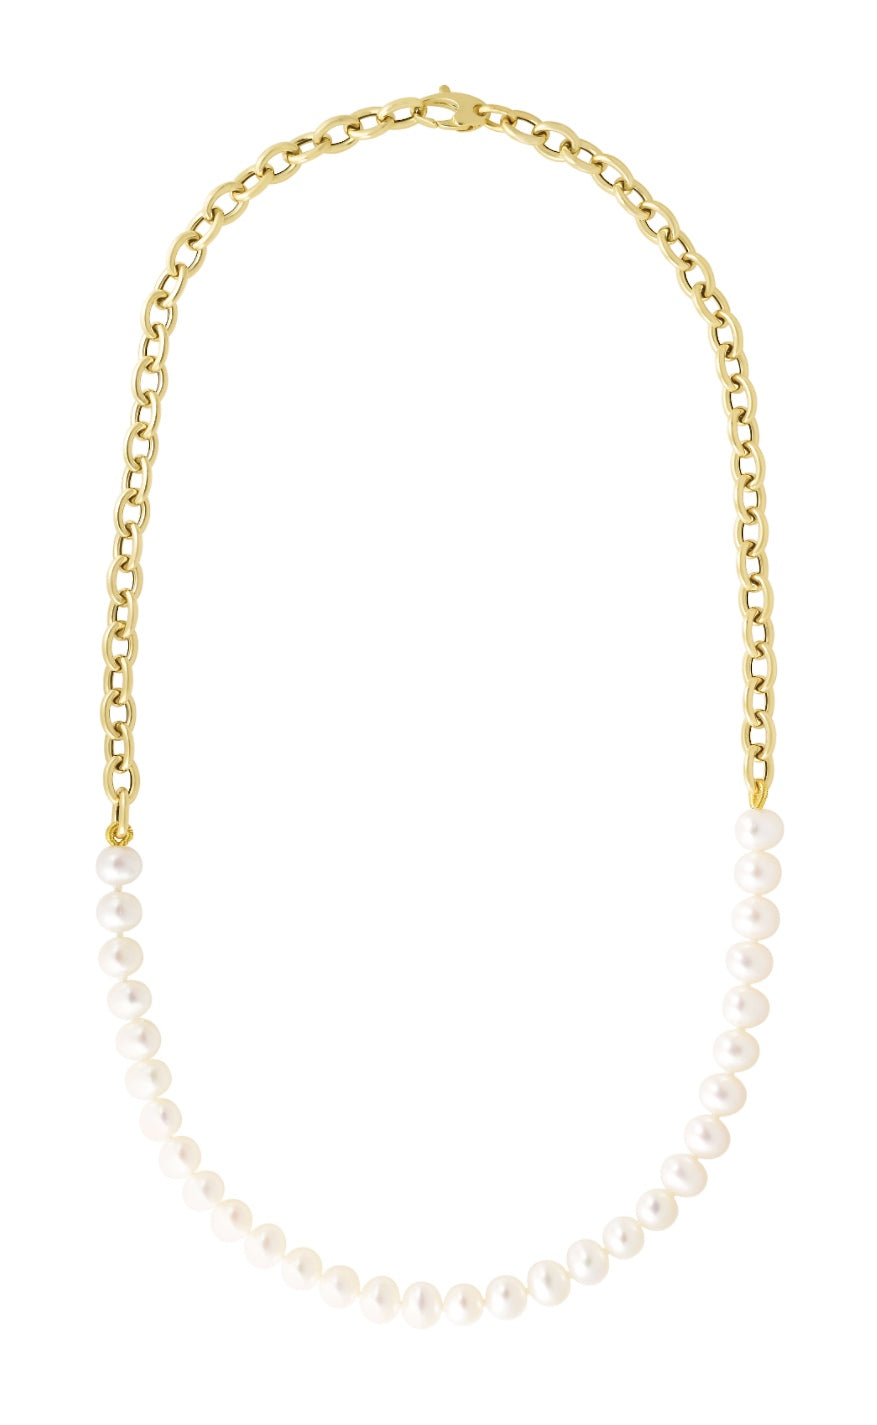 Dressed to Impress Pearl & Gold Rolo Chain Necklace